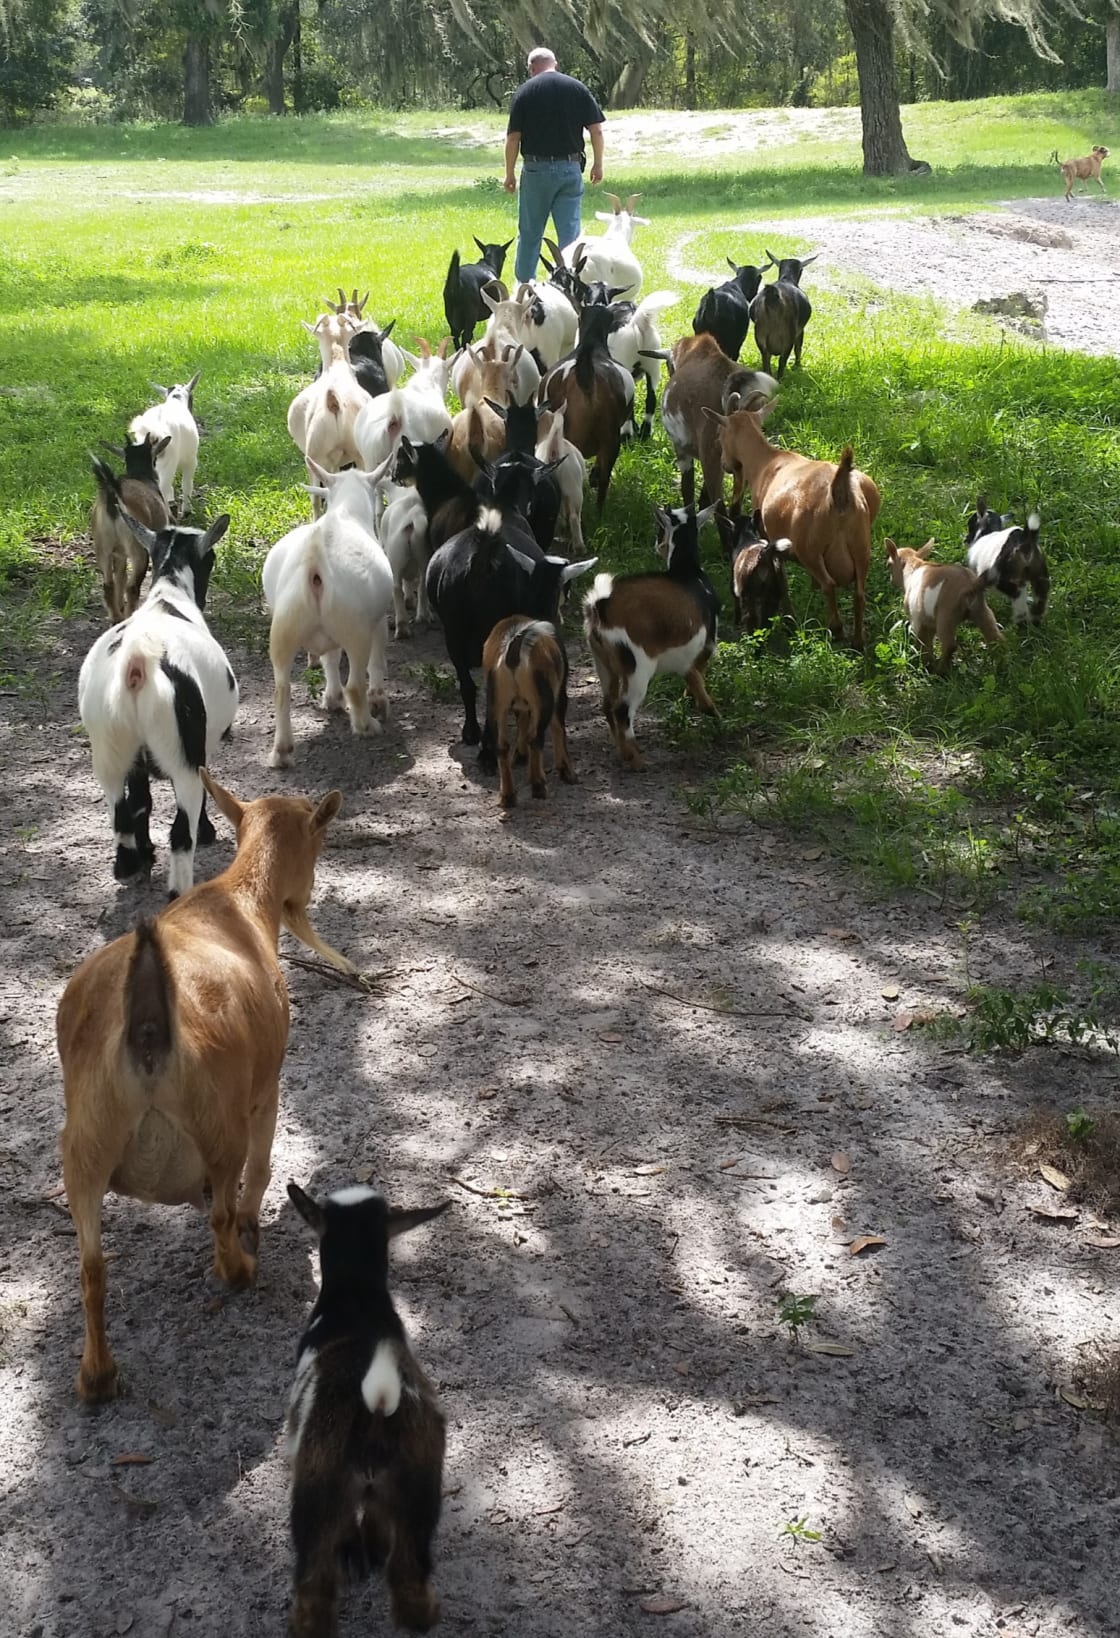 Visit the Ranch for some close up fun with Nigerian Goats and livestock